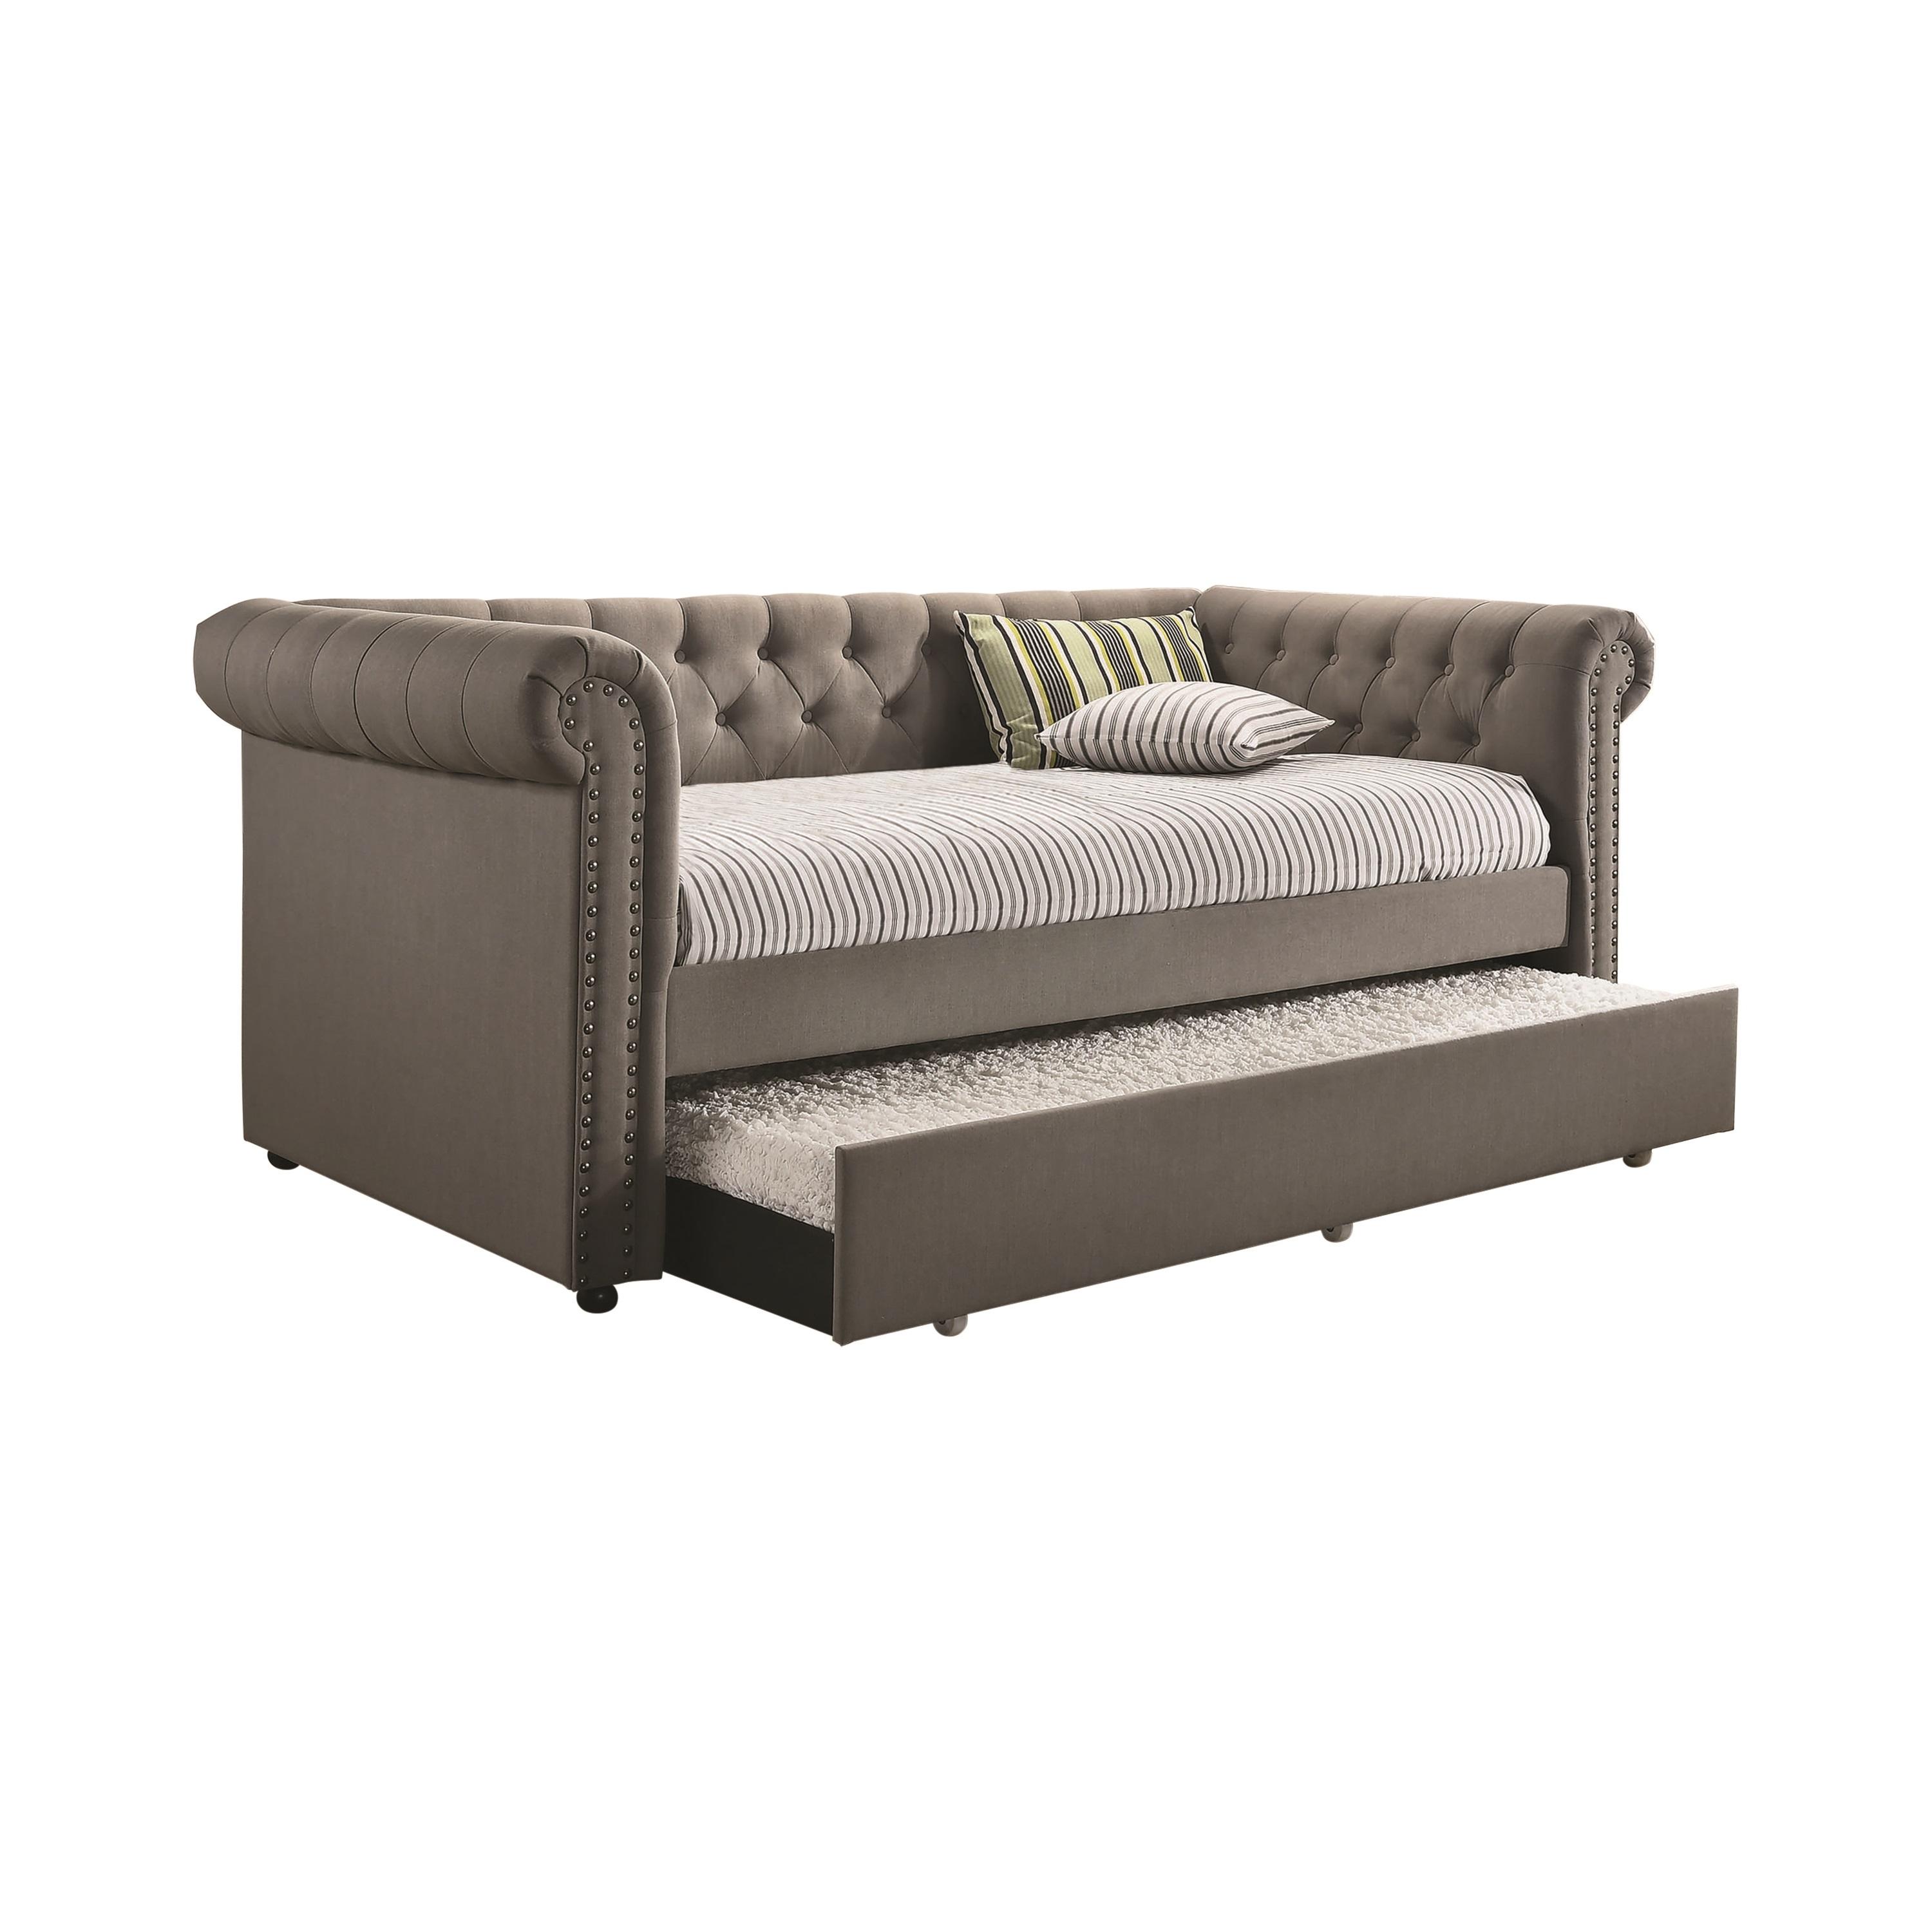 Traditional Daybed w/Trundle 300549 Kepner 300549 in Gray Fabric